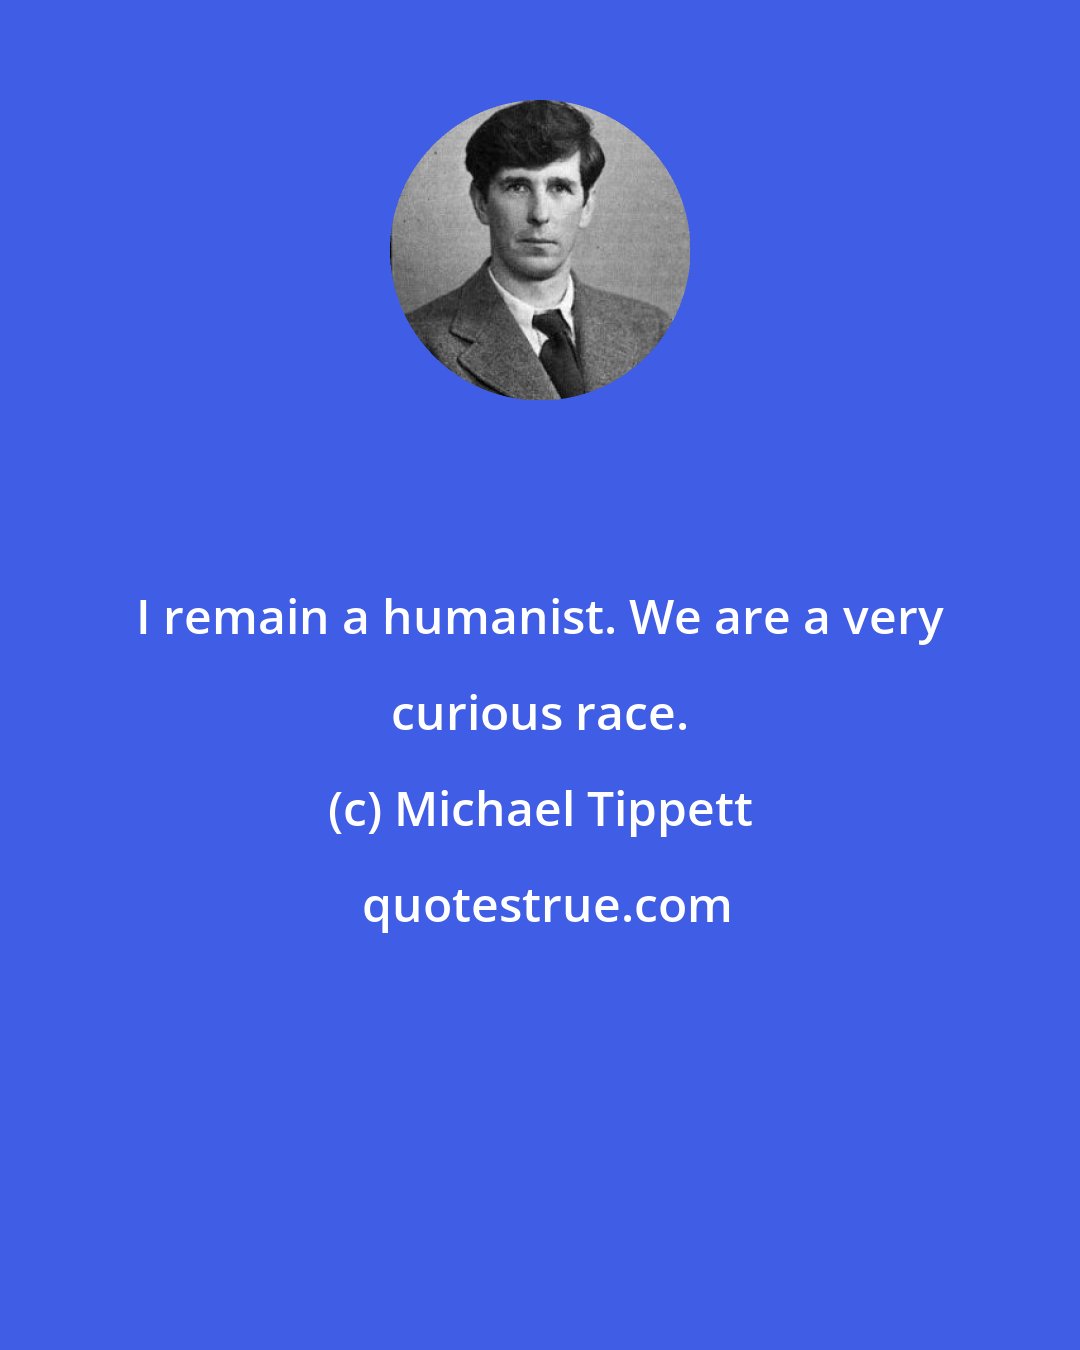 Michael Tippett: I remain a humanist. We are a very curious race.